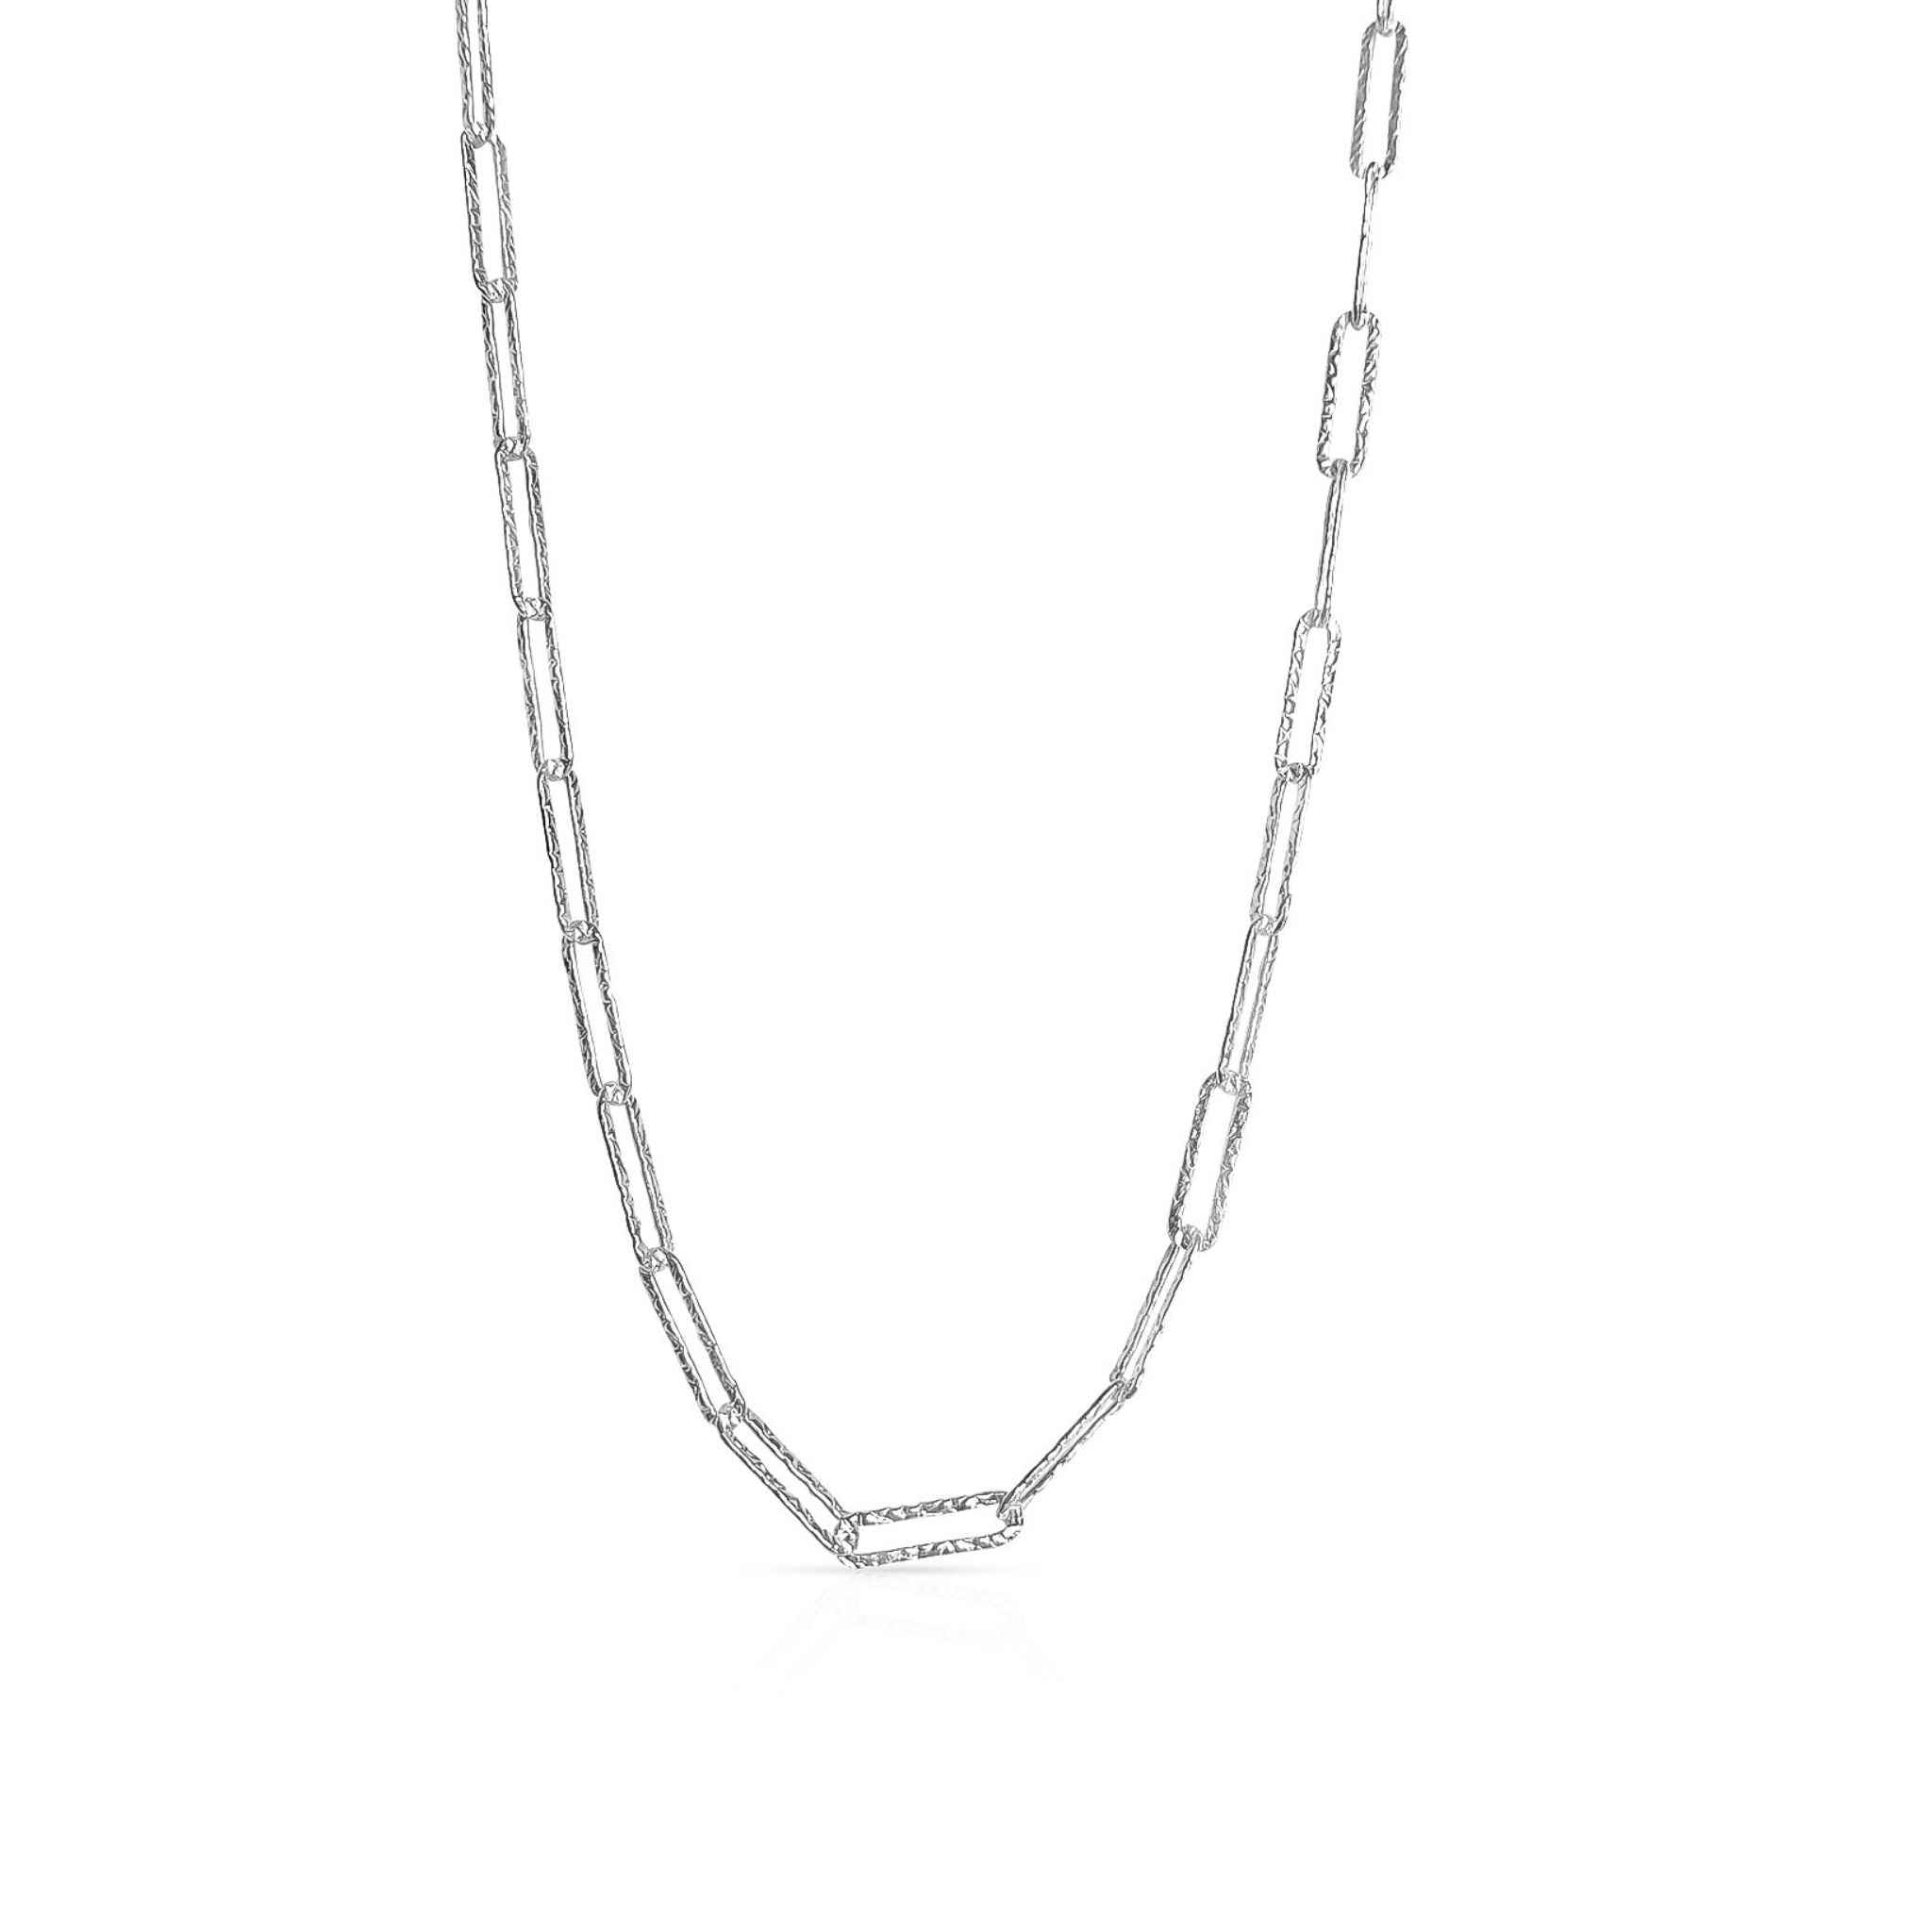 Elegant sterling silver Hammered Paperclip Chain Necklace, a perfect representation of the quiet luxury trend.